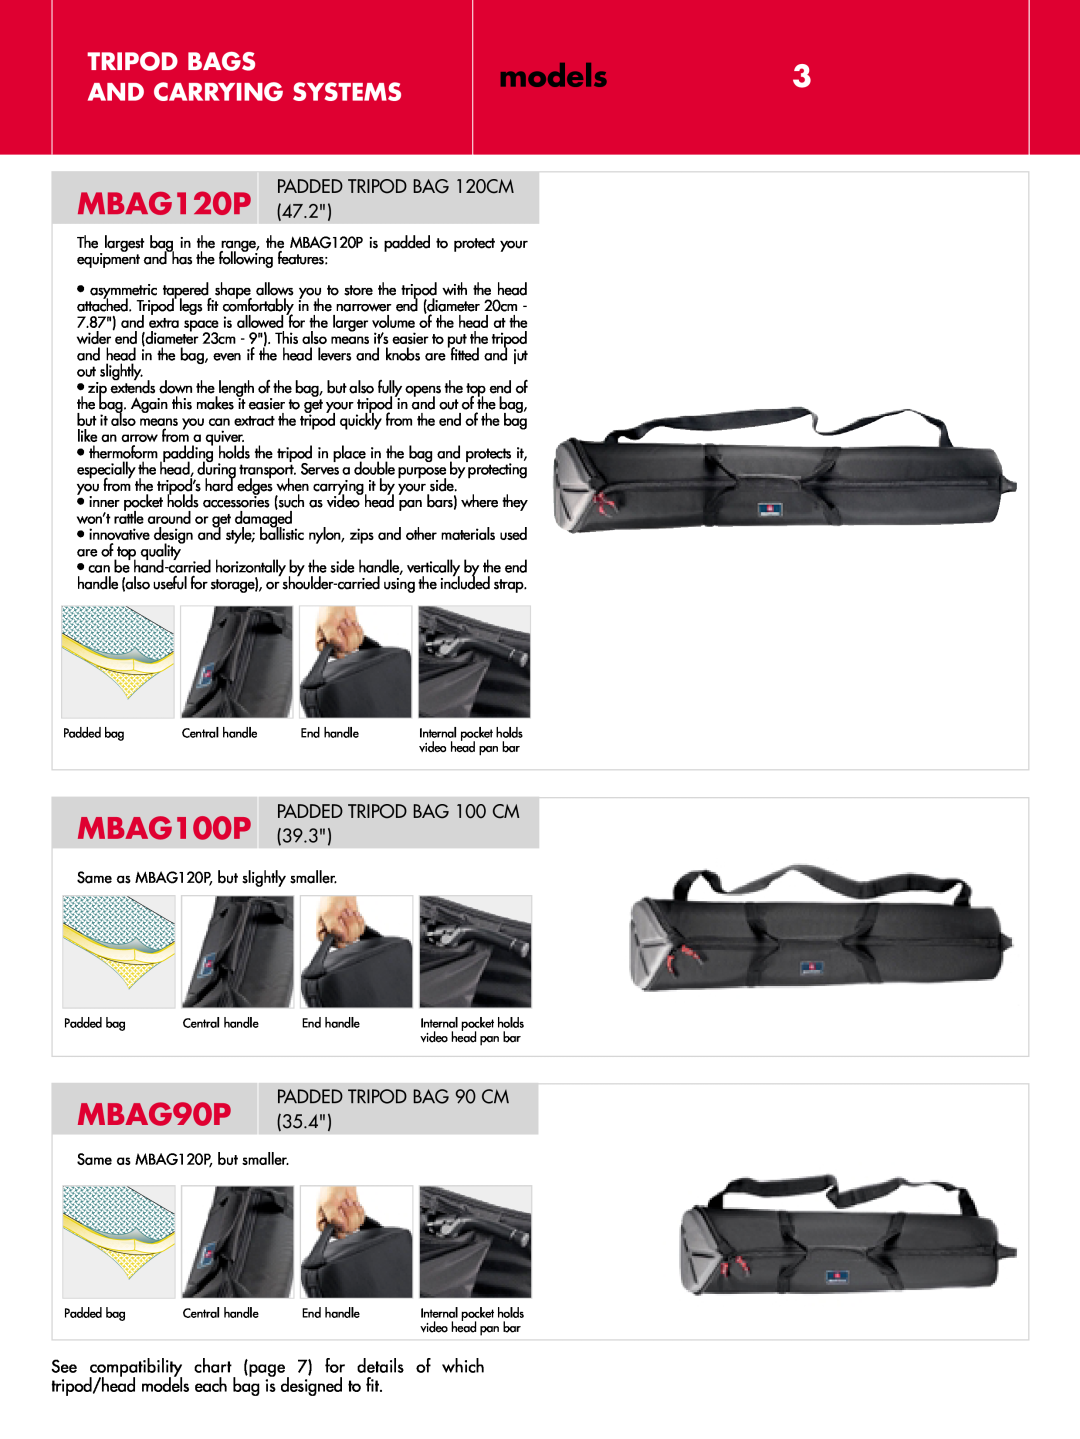 Manfrotto MBAG80, MBAGD models3, MBAG120P, MBAG100P, MBAG90P, Tripod Bags And Carrying Systems, PADDED TRIPOD BAG 120CM 